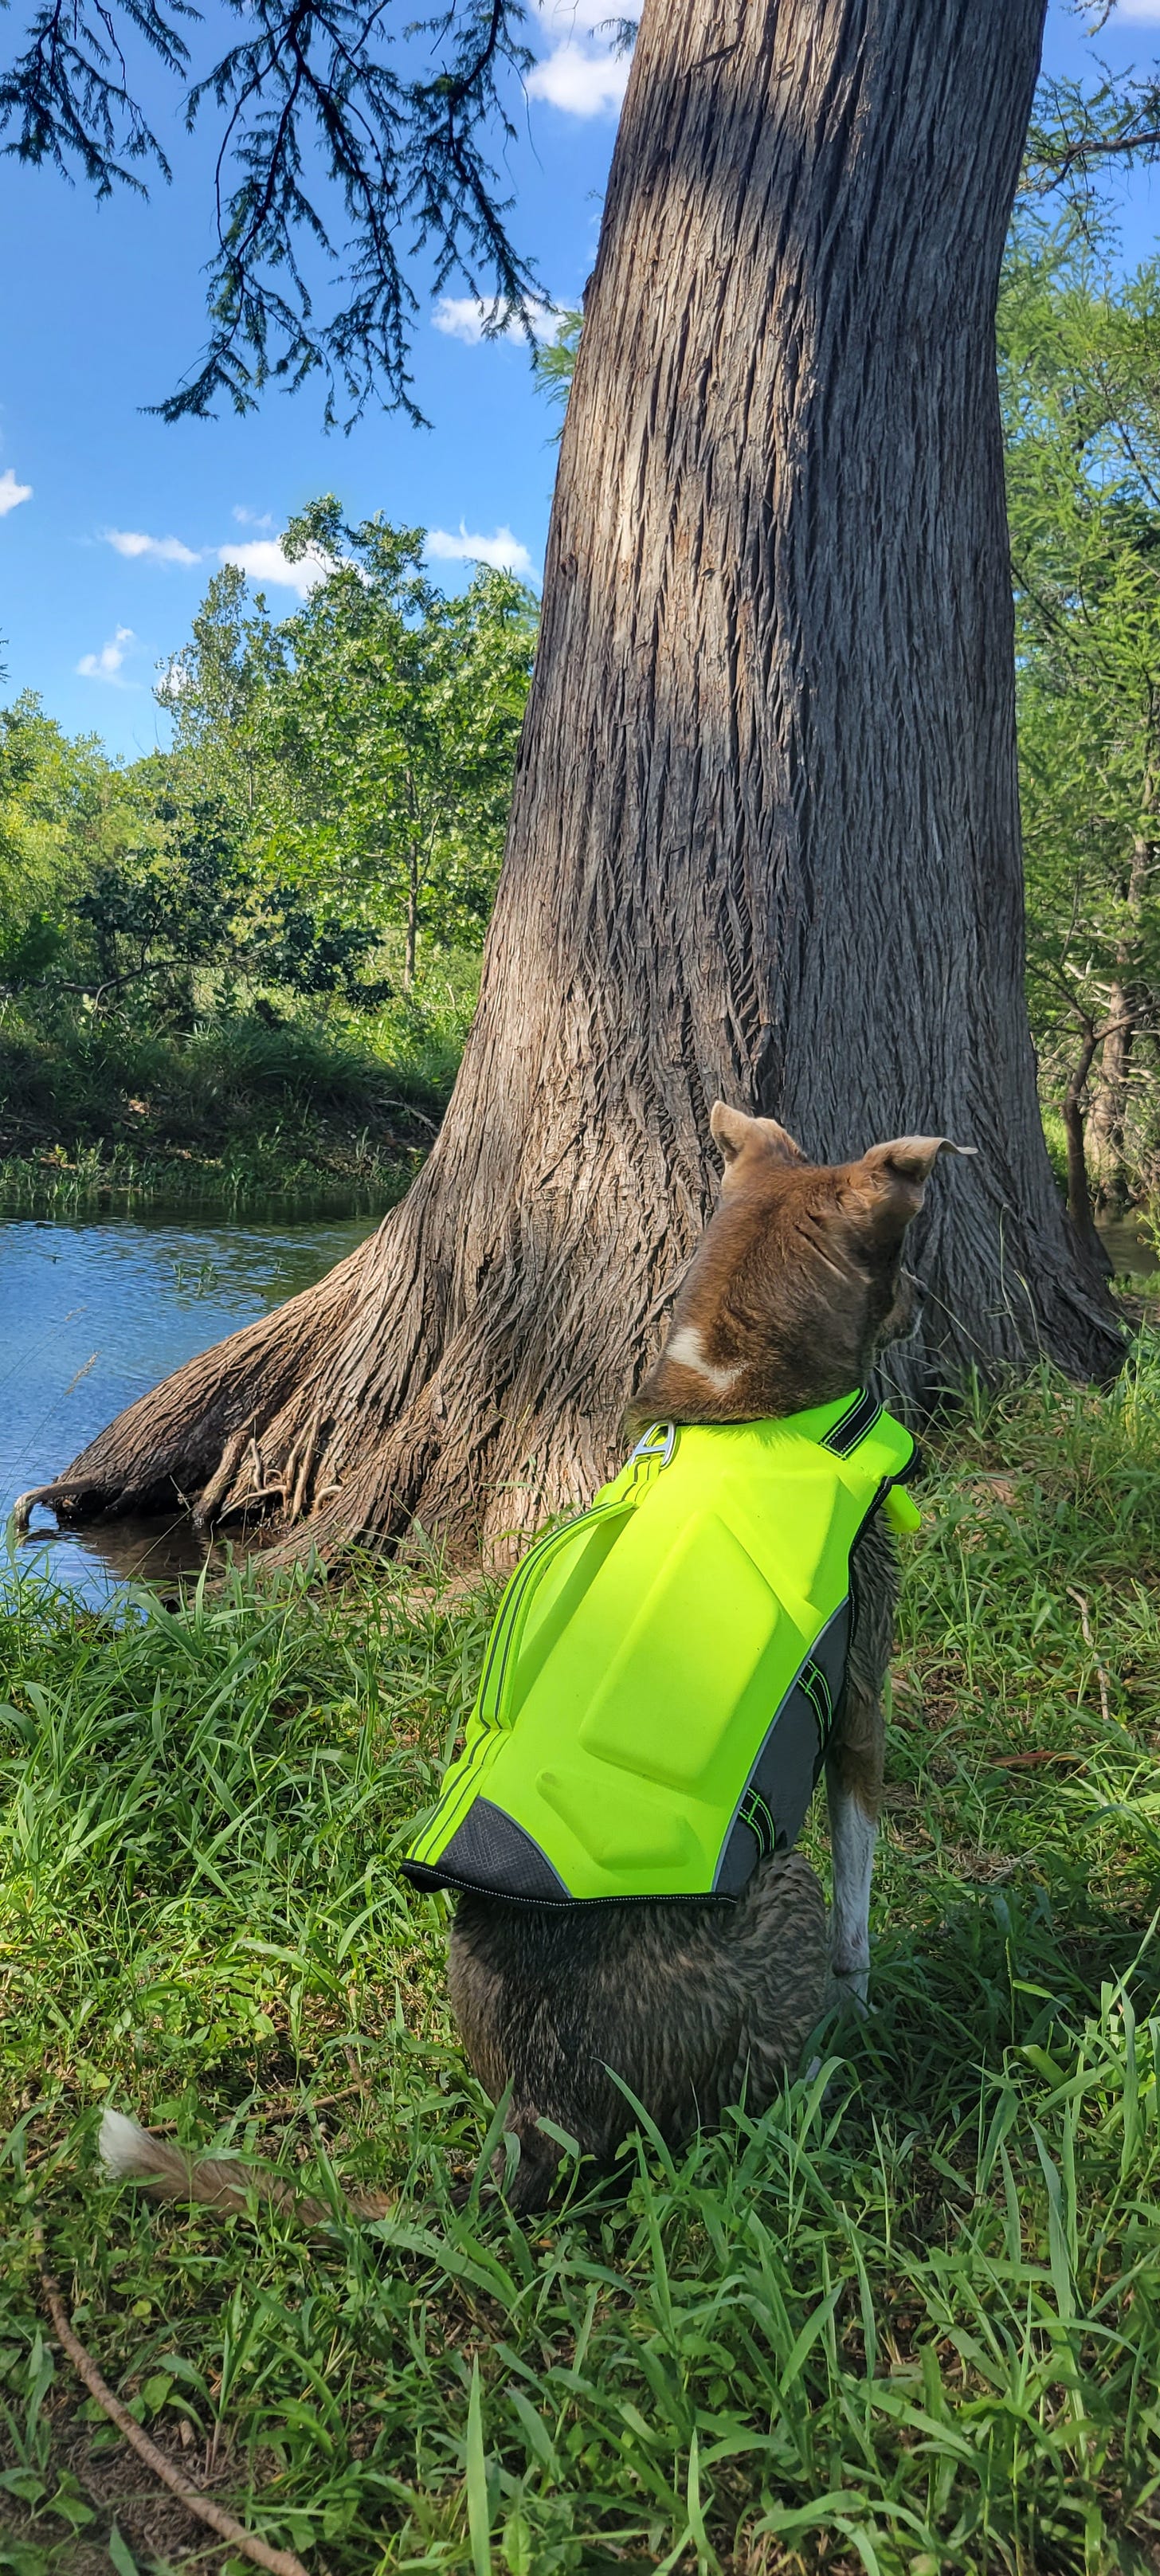 A brown and white dog in a neon yellow lifejacket sits on the shore of a river with her back to the camera.